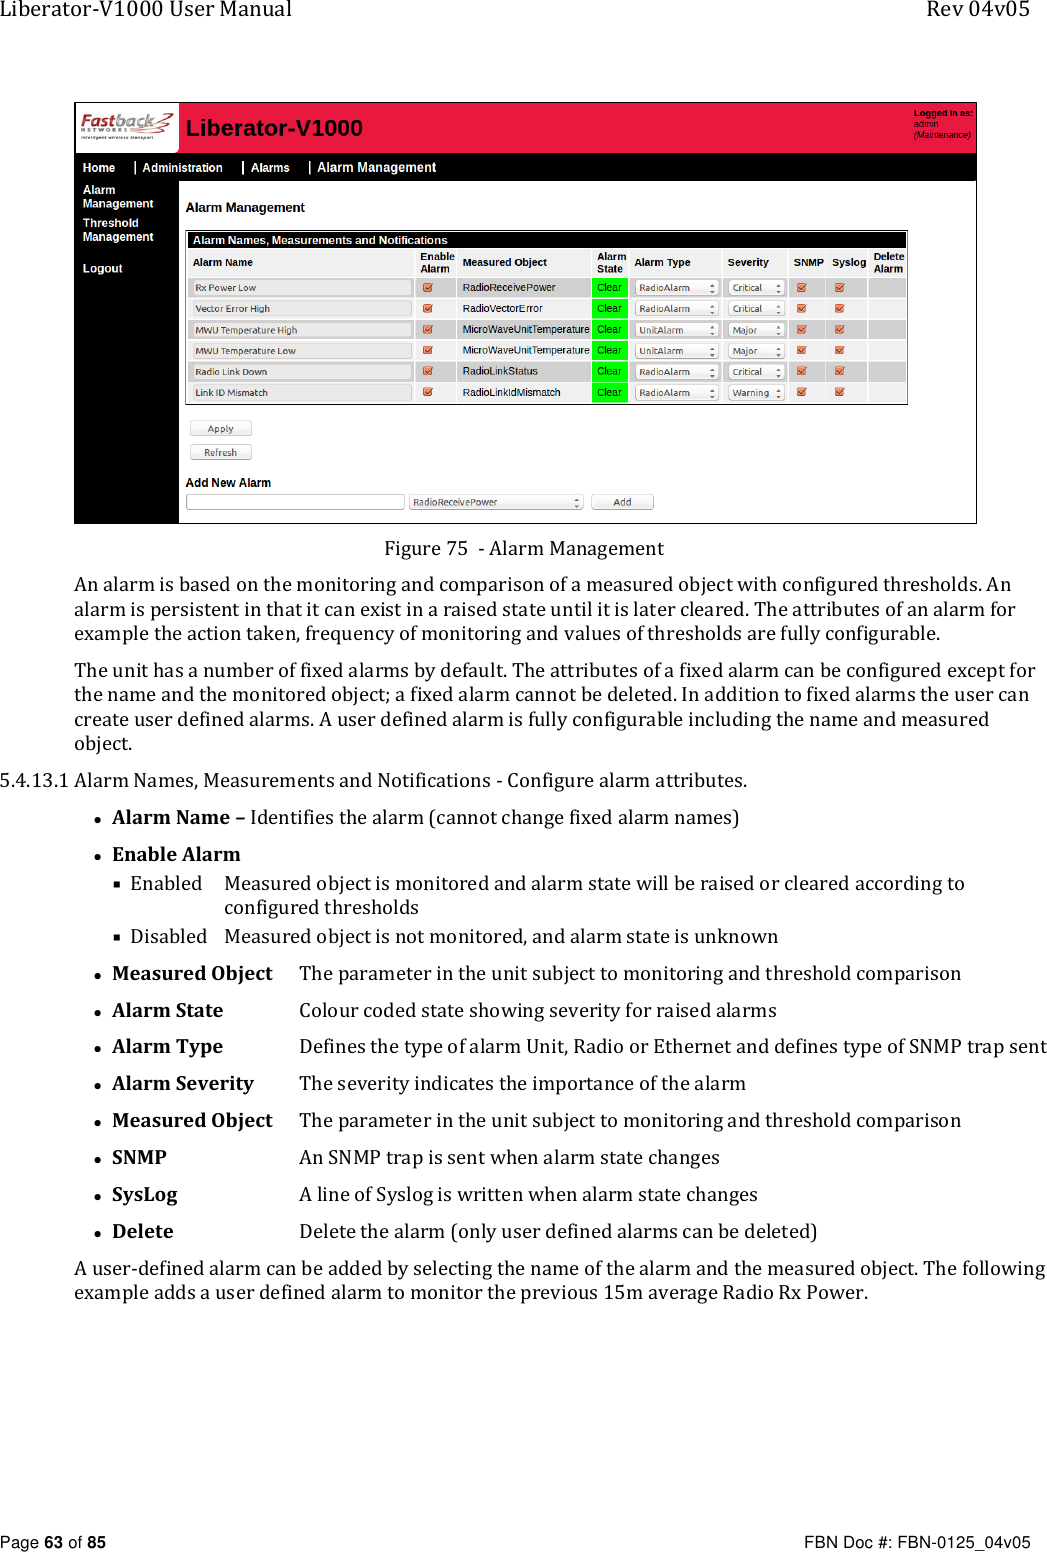 Liberator-V1000 User Manual  Rev 04v05     Page 63 of 85   FBN Doc #: FBN-0125_04v05  Figure 75  - Alarm Management An alarm is based on the monitoring and comparison of a measured object with configured thresholds. An alarm is persistent in that it can exist in a raised state until it is later cleared. The attributes of an alarm for example the action taken, frequency of monitoring and values of thresholds are fully configurable. The unit has a number of fixed alarms by default. The attributes of a fixed alarm can be configured except for the name and the monitored object; a fixed alarm cannot be deleted. In addition to fixed alarms the user can create user defined alarms. A user defined alarm is fully configurable including the name and measured object. 5.4.13.1 Alarm Names, Measurements and Notifications - Configure alarm attributes. • Alarm Name – Identifies the alarm (cannot change fixed alarm names) • Enable Alarm  Enabled   Measured object is monitored and alarm state will be raised or cleared according to configured thresholds  Disabled   Measured object is not monitored, and alarm state is unknown • Measured Object   The parameter in the unit subject to monitoring and threshold comparison • Alarm State   Colour coded state showing severity for raised alarms • Alarm Type  Defines the type of alarm Unit, Radio or Ethernet and defines type of SNMP trap sent   • Alarm Severity   The severity indicates the importance of the alarm • Measured Object   The parameter in the unit subject to monitoring and threshold comparison • SNMP  An SNMP trap is sent when alarm state changes • SysLog  A line of Syslog is written when alarm state changes • Delete  Delete the alarm (only user defined alarms can be deleted) A user-defined alarm can be added by selecting the name of the alarm and the measured object. The following example adds a user defined alarm to monitor the previous 15m average Radio Rx Power.   